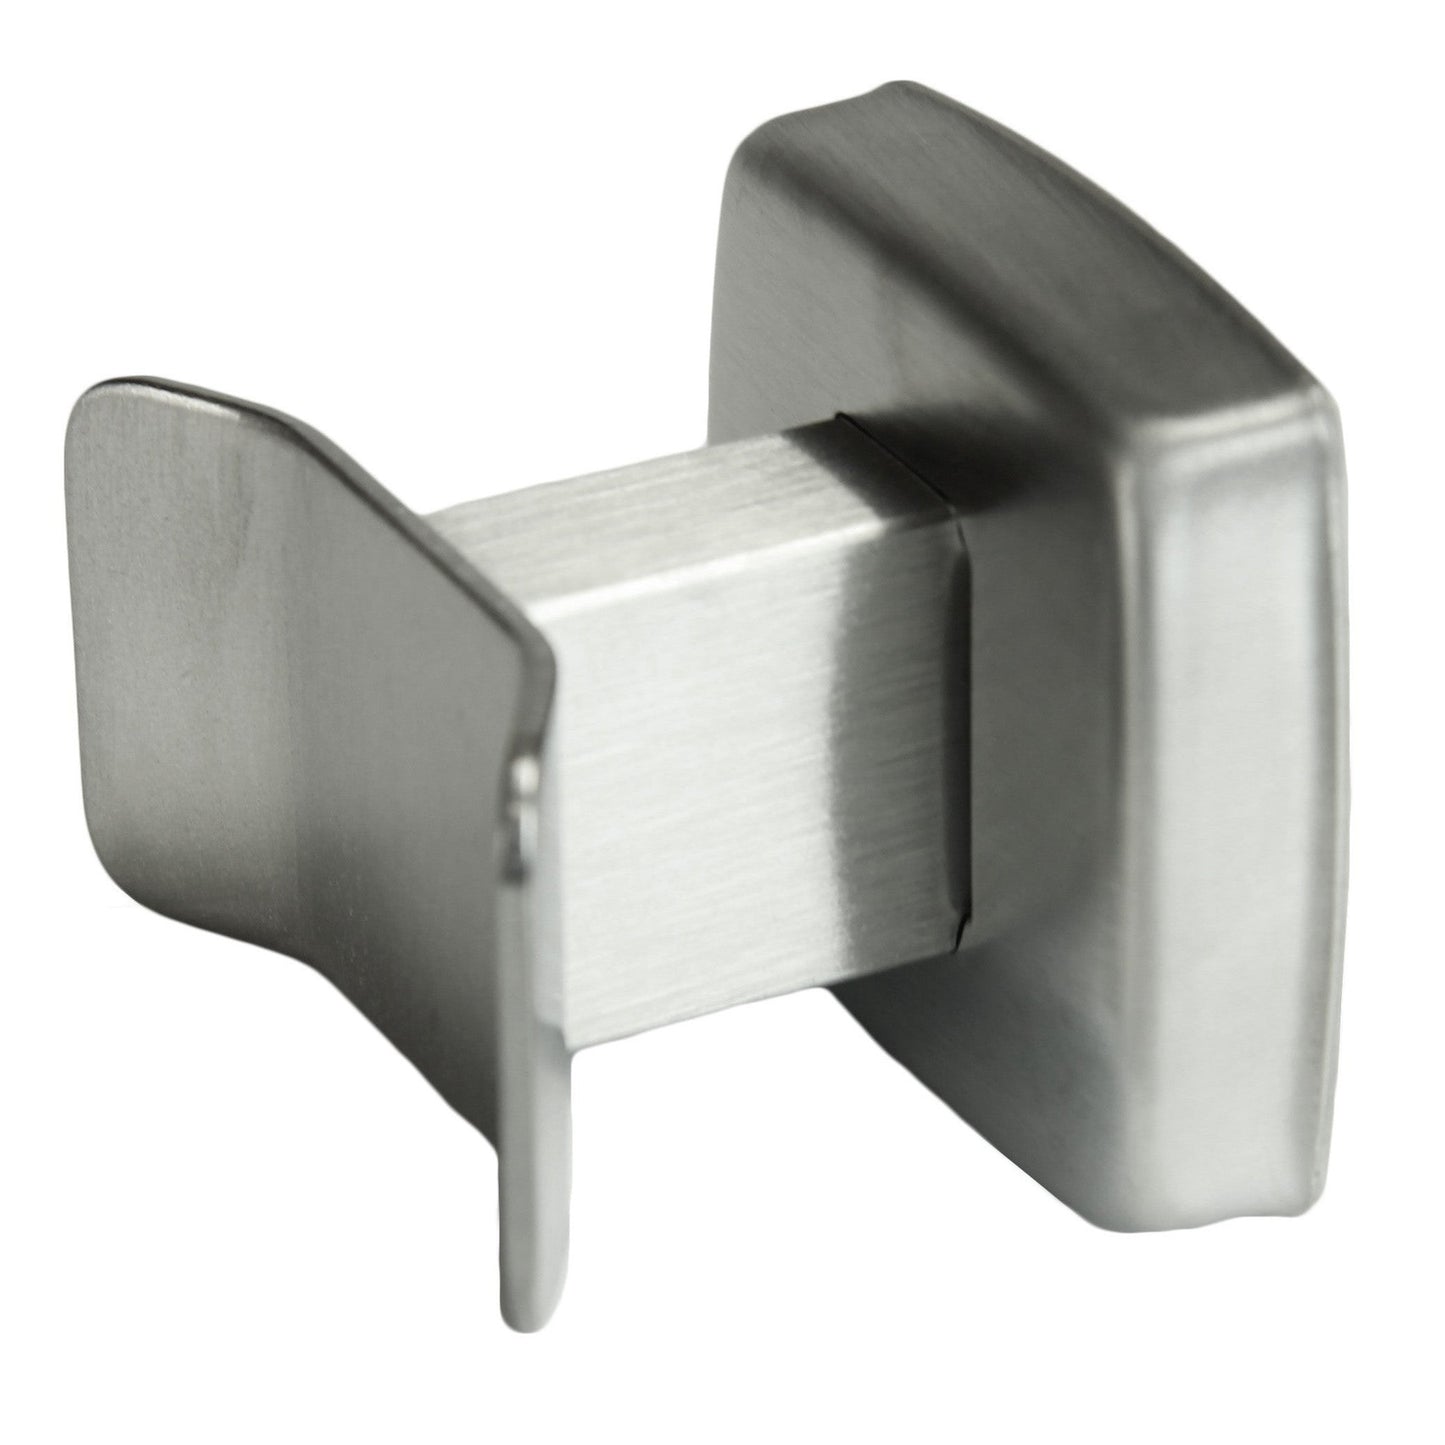 Frost 2 x 1.88 x 2 Stainless Steel Brushed Washroom Accessories